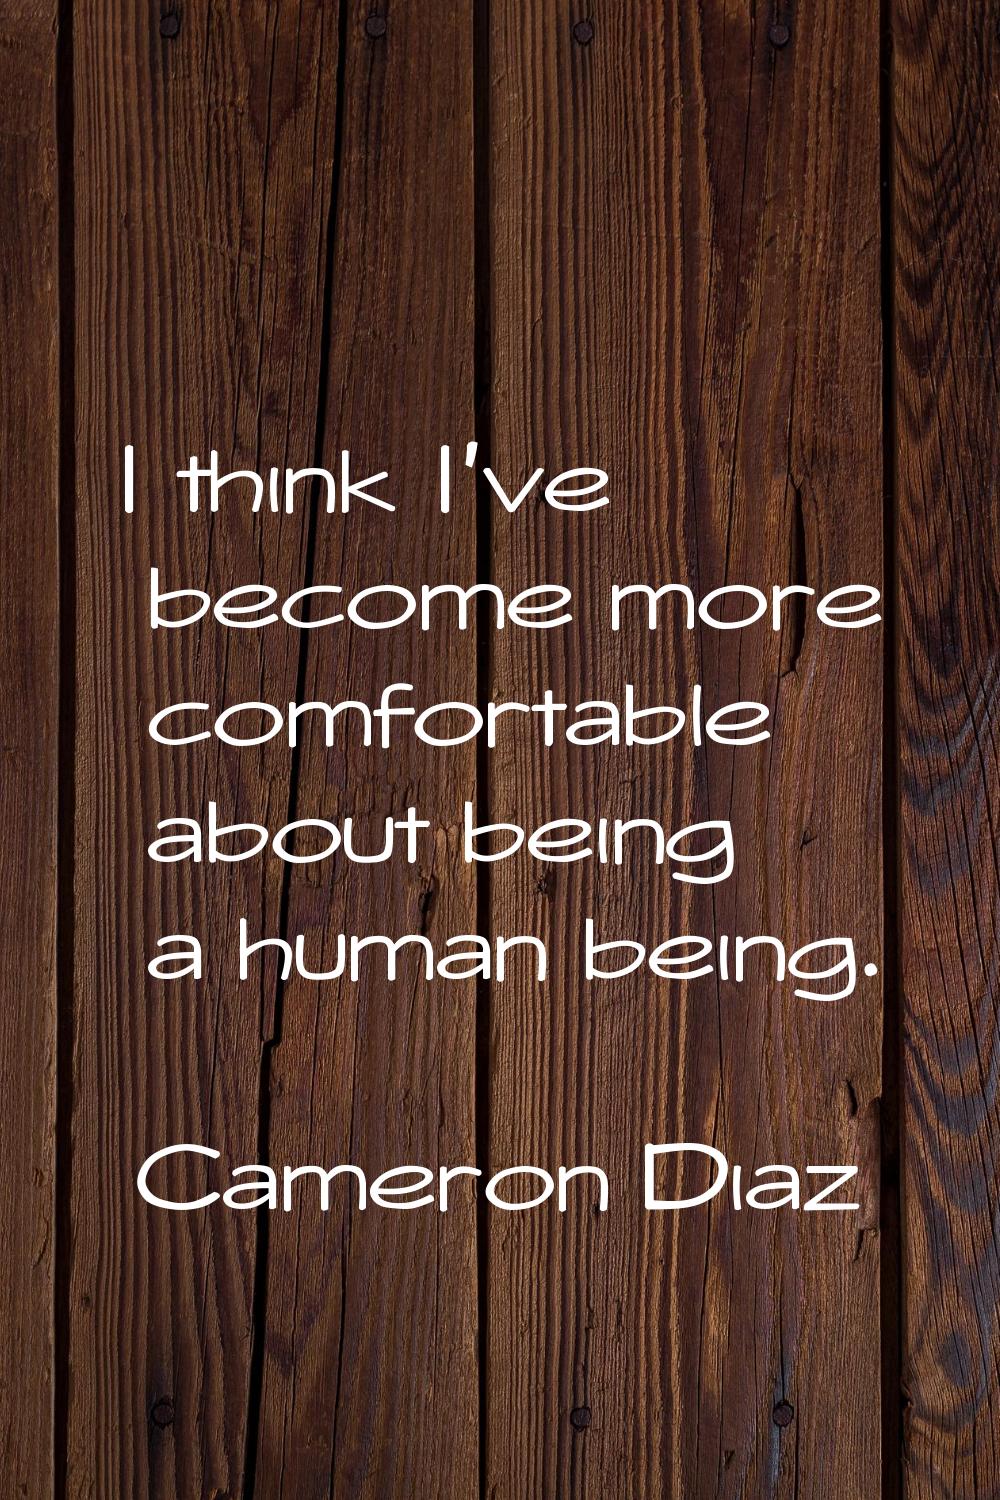 I think I've become more comfortable about being a human being.